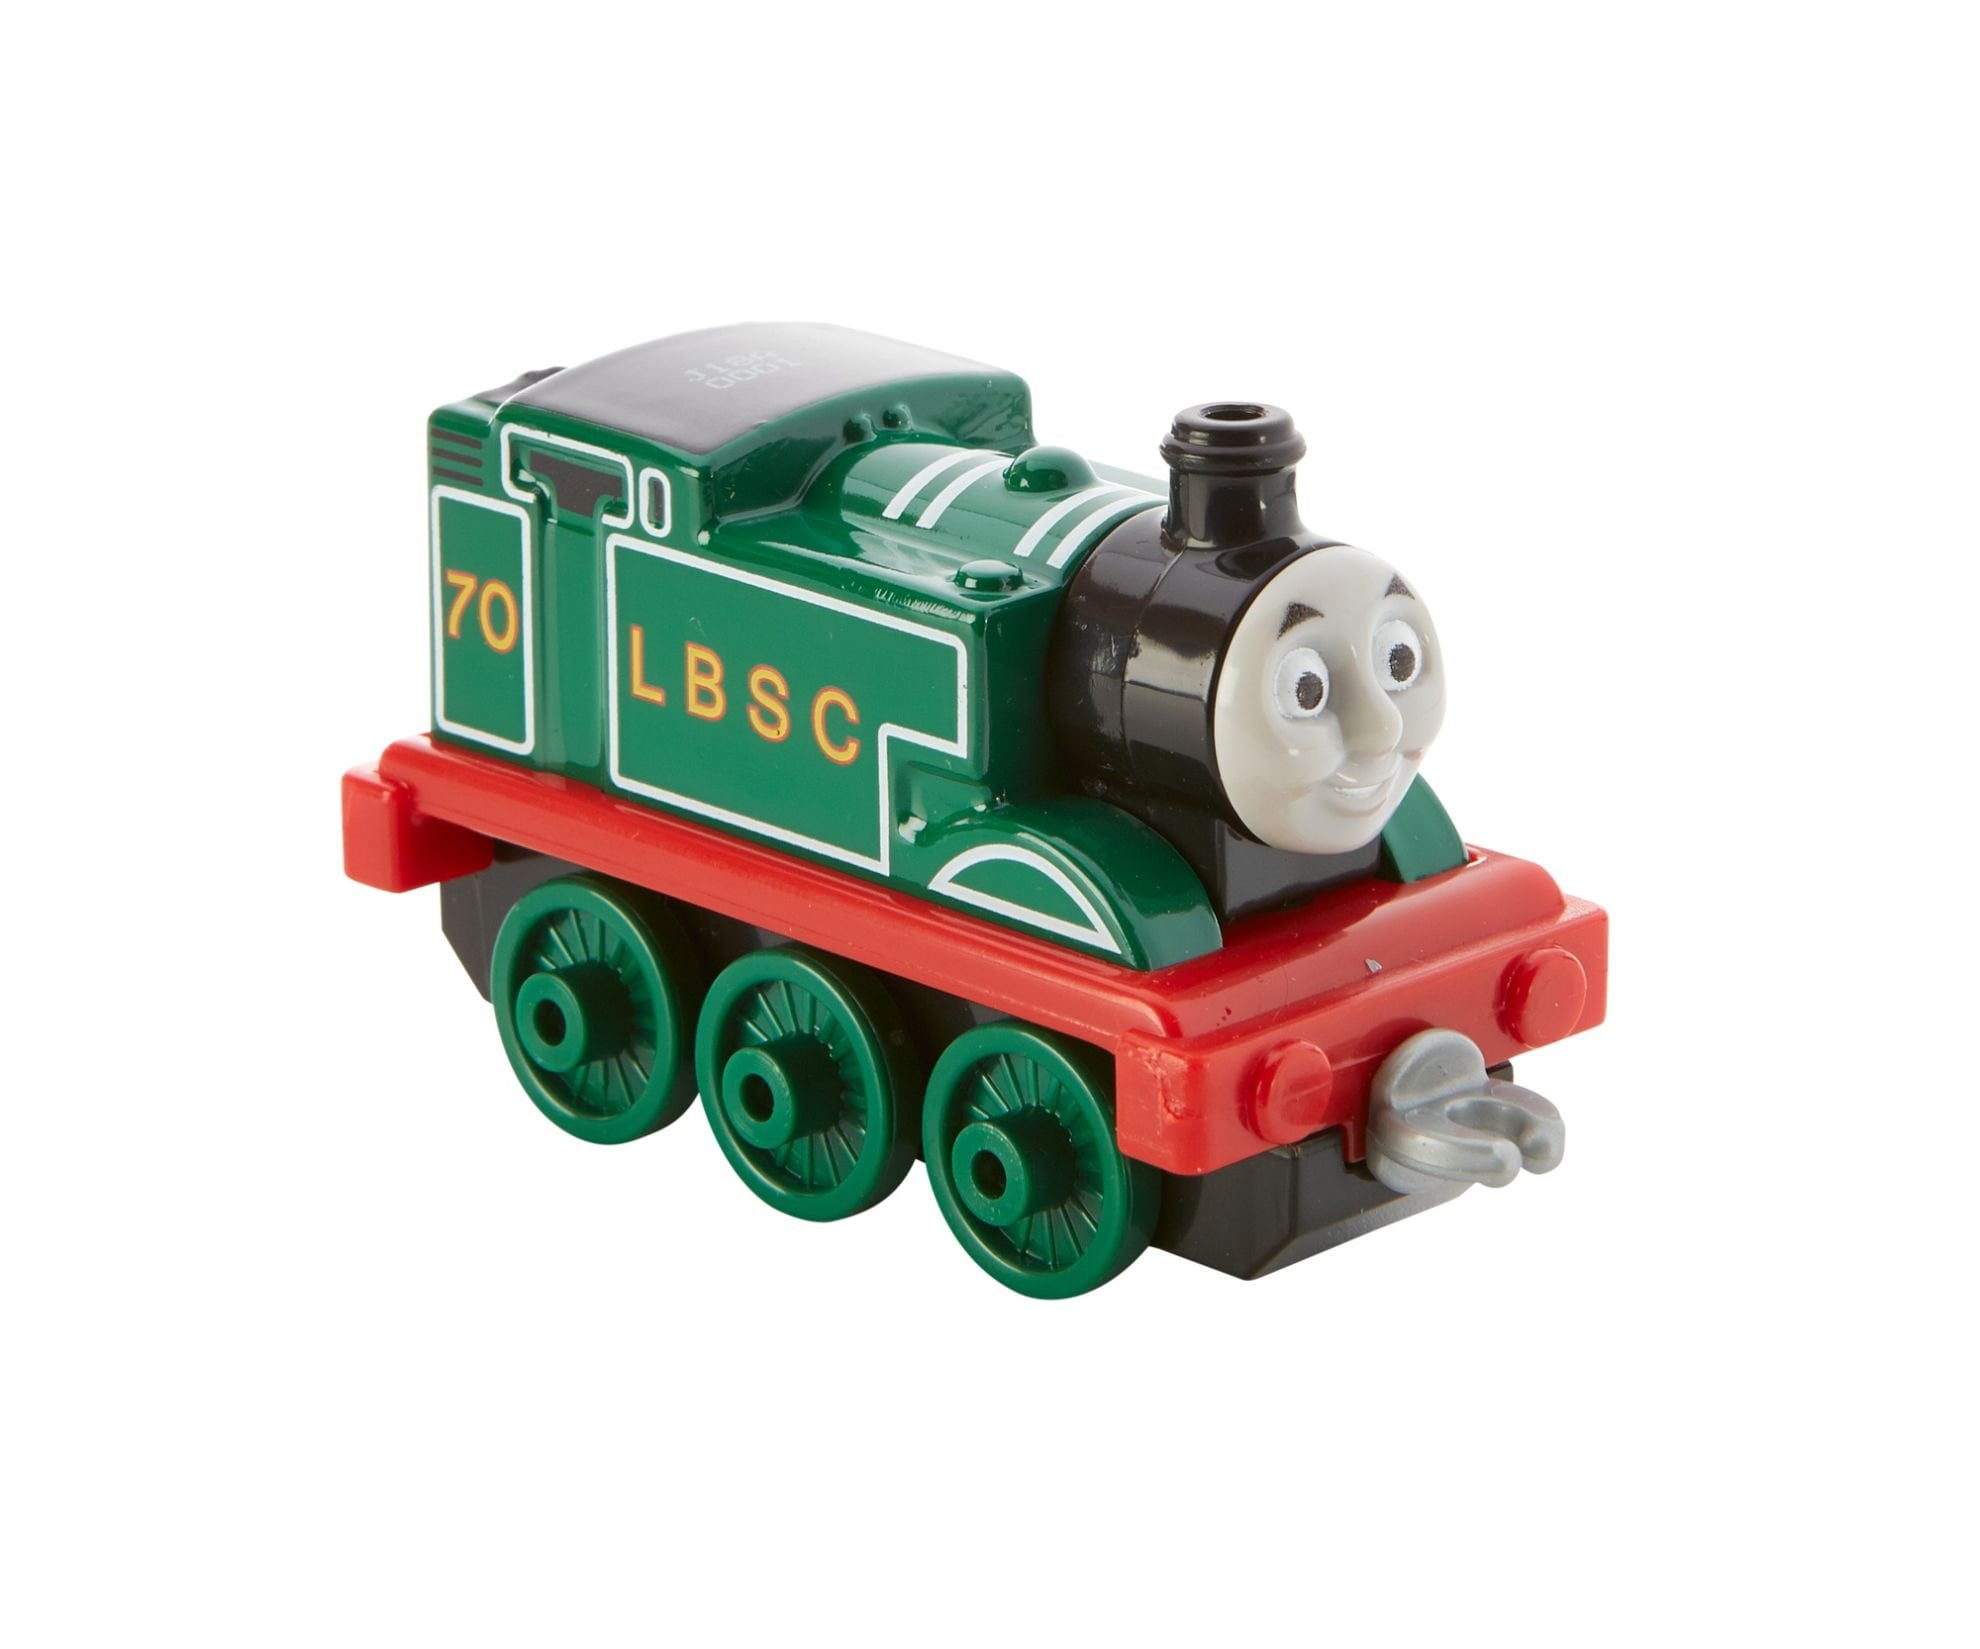 Details about   Thomas & Friends Adventures SPECIAL EDITION ORIGINAL Green Train Engine METAL